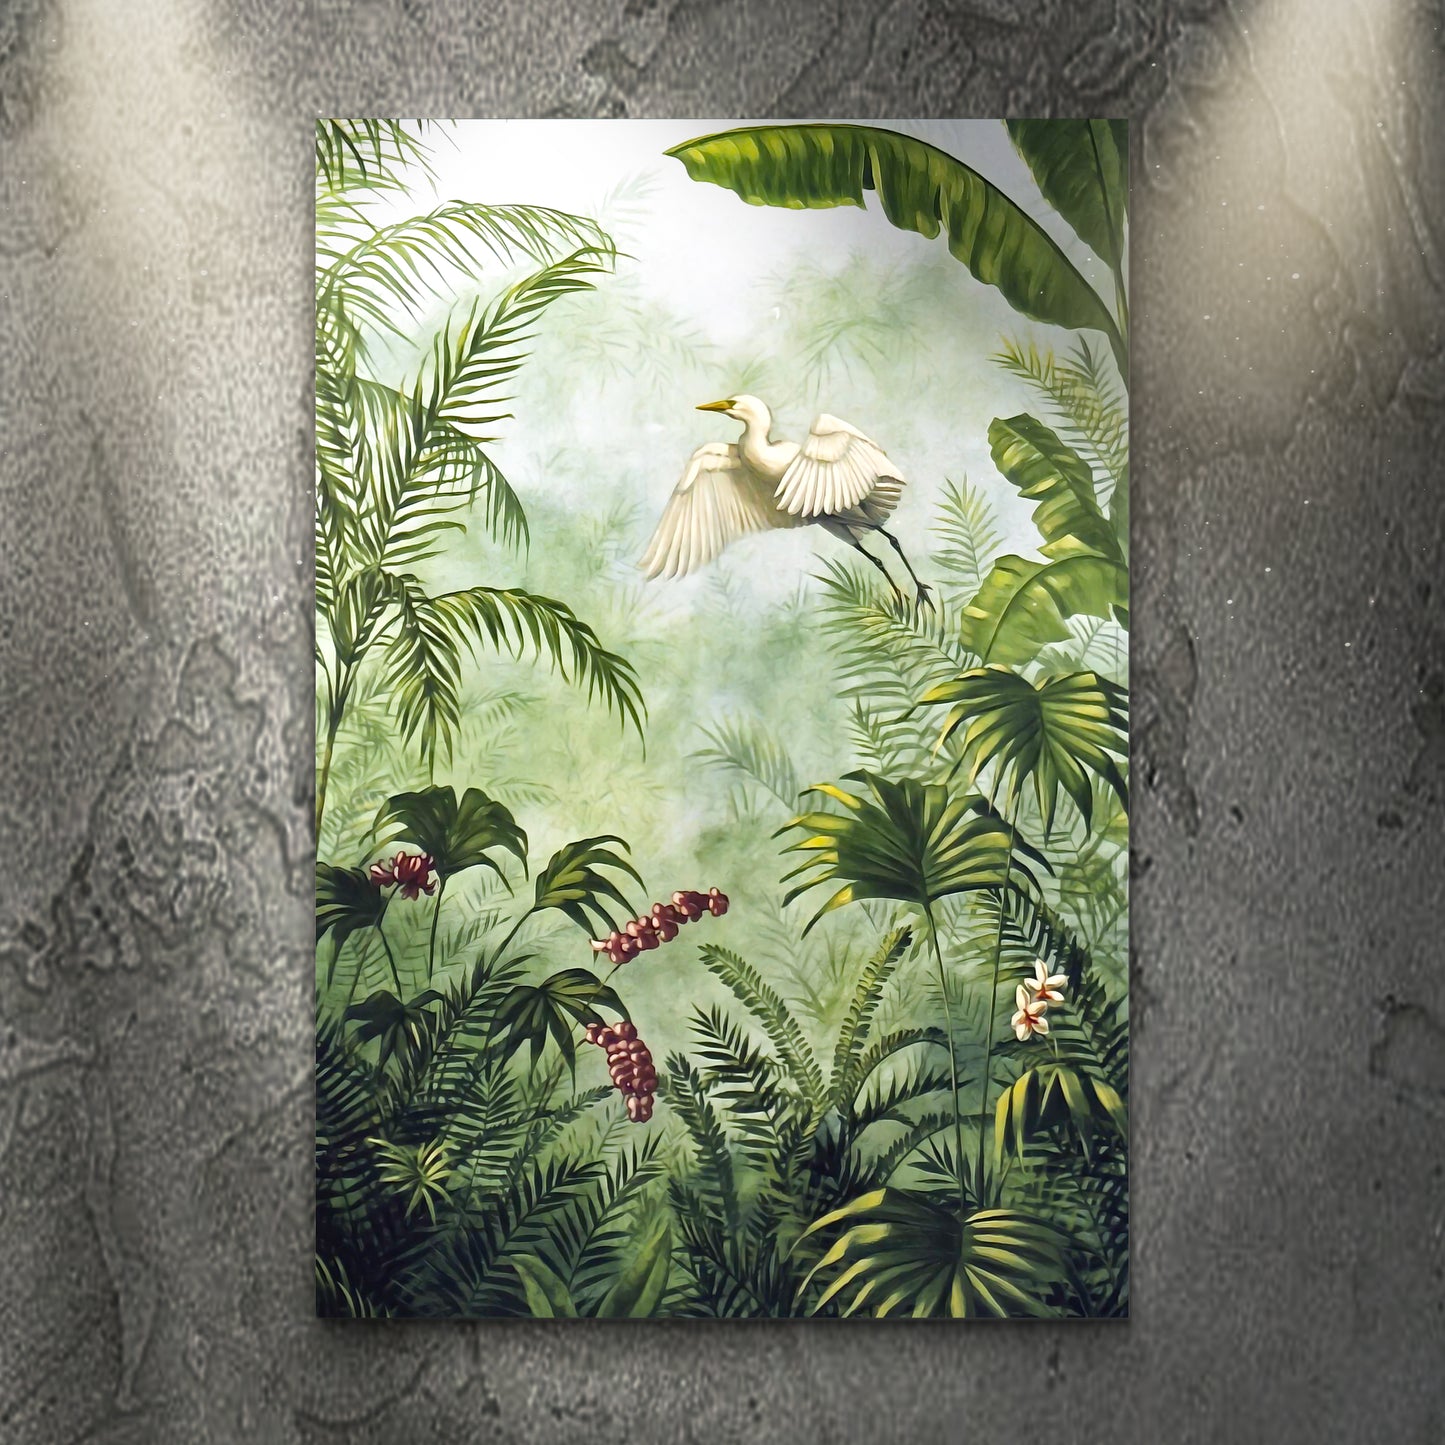 Tropical Rainforest Plants Canvas Wall Art - Image by Tailored Canvases